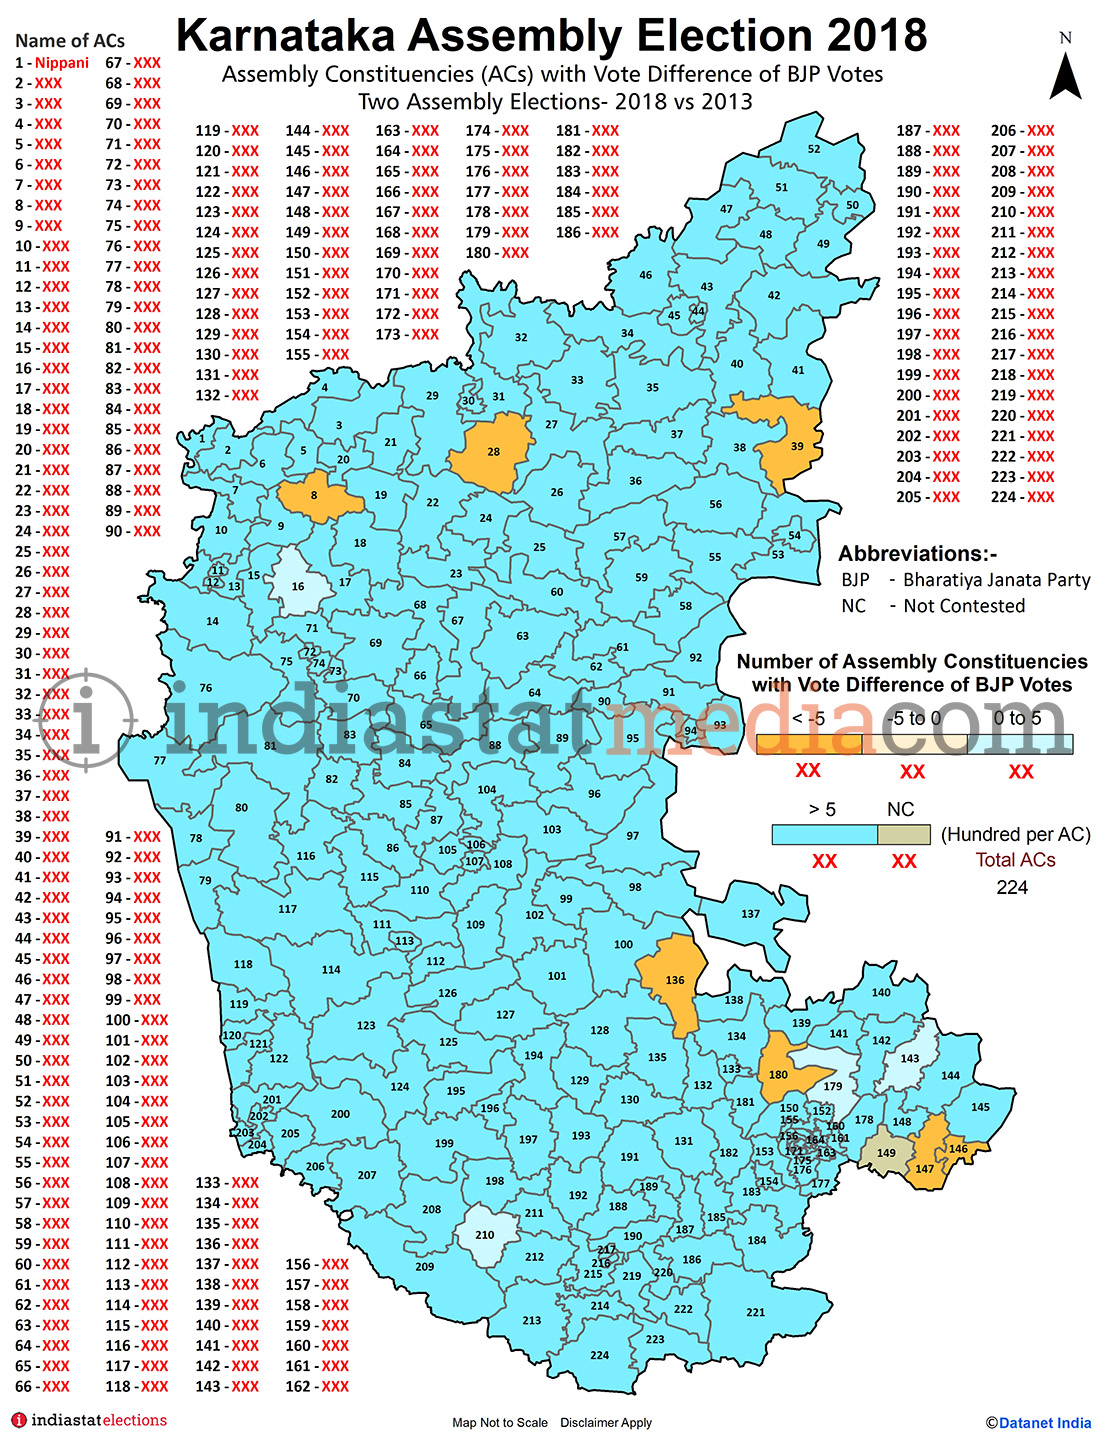 Assembly Constituencies with Vote Difference of BJP Votes in Karnataka (Assembly Elections - 2013 & 2018)